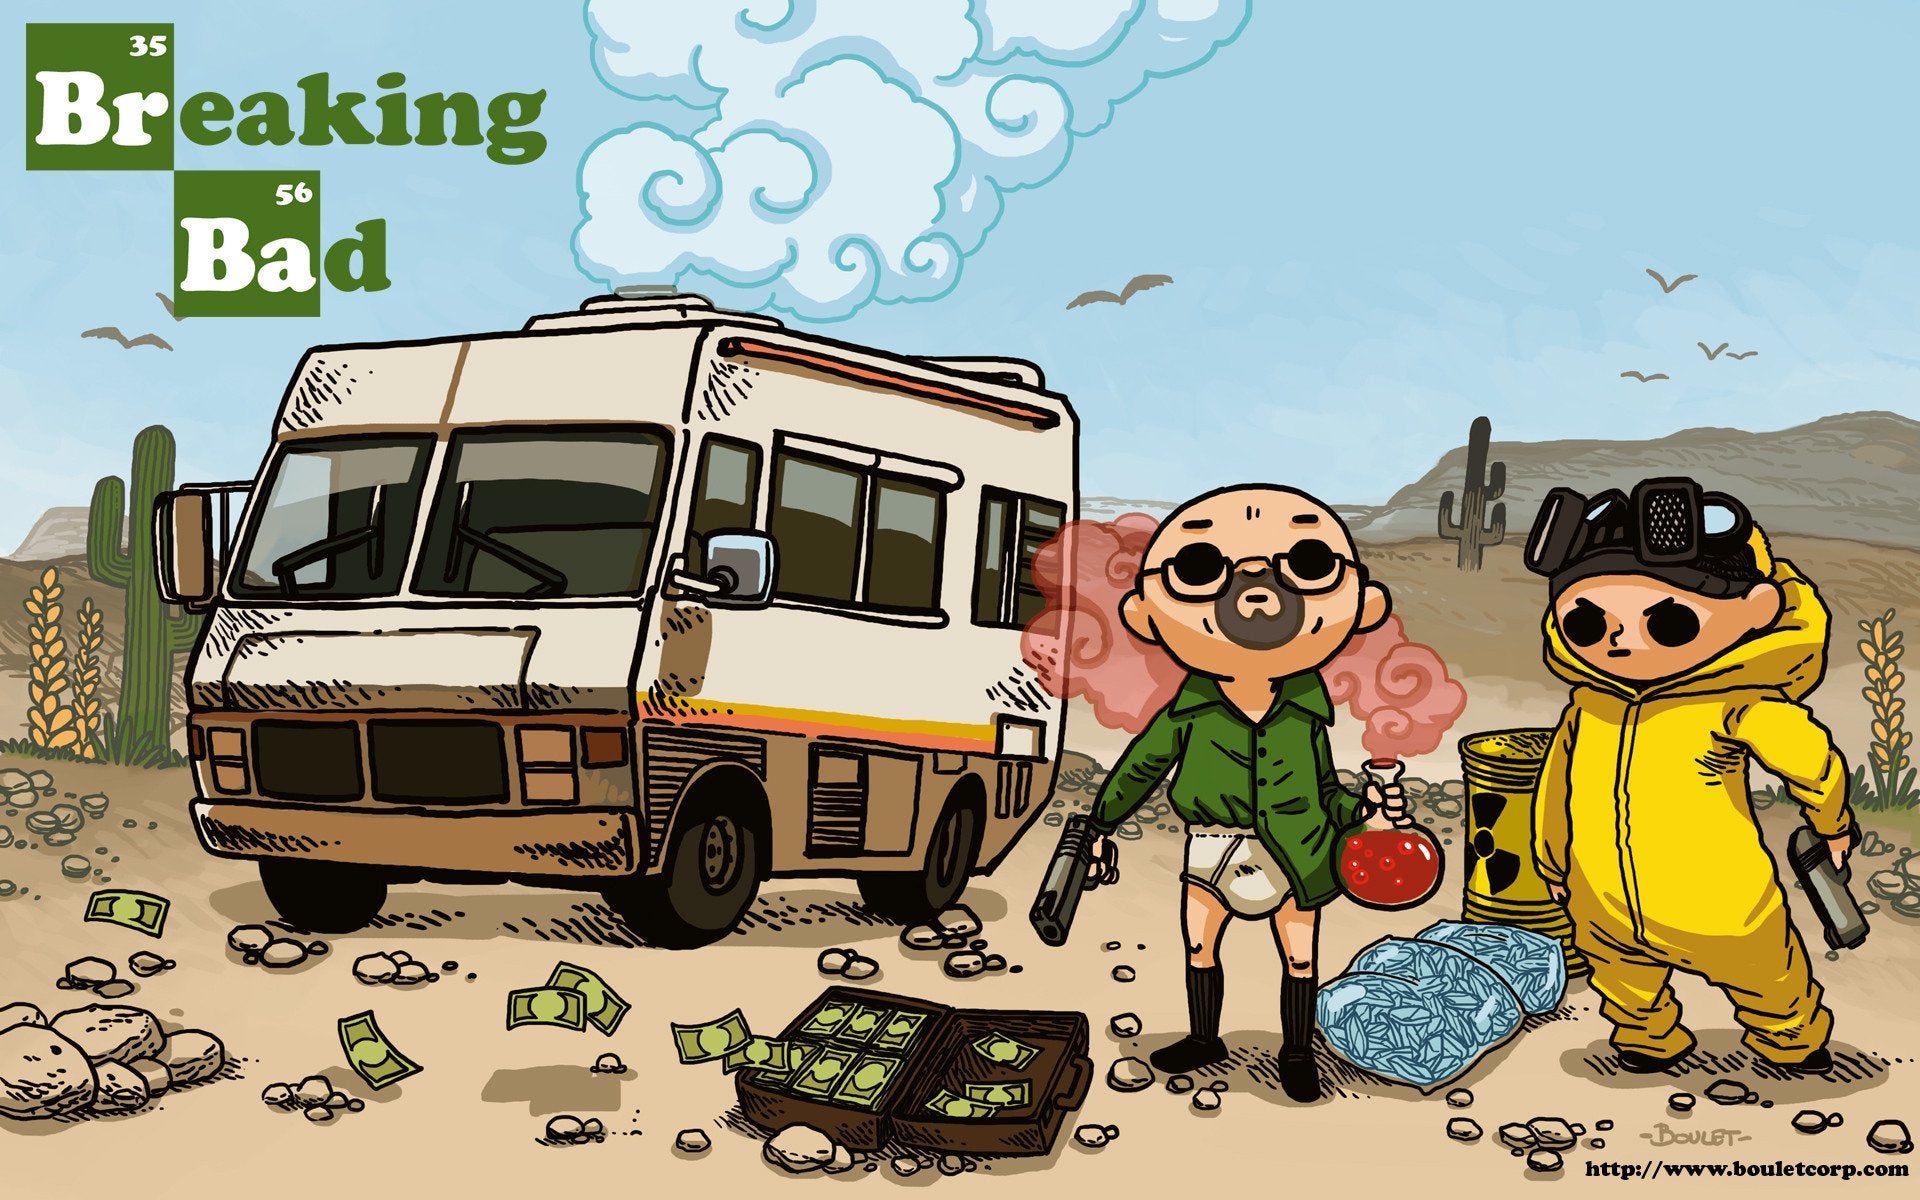 Awesome Cartoon Breaking Bad Wallpaper From The Same